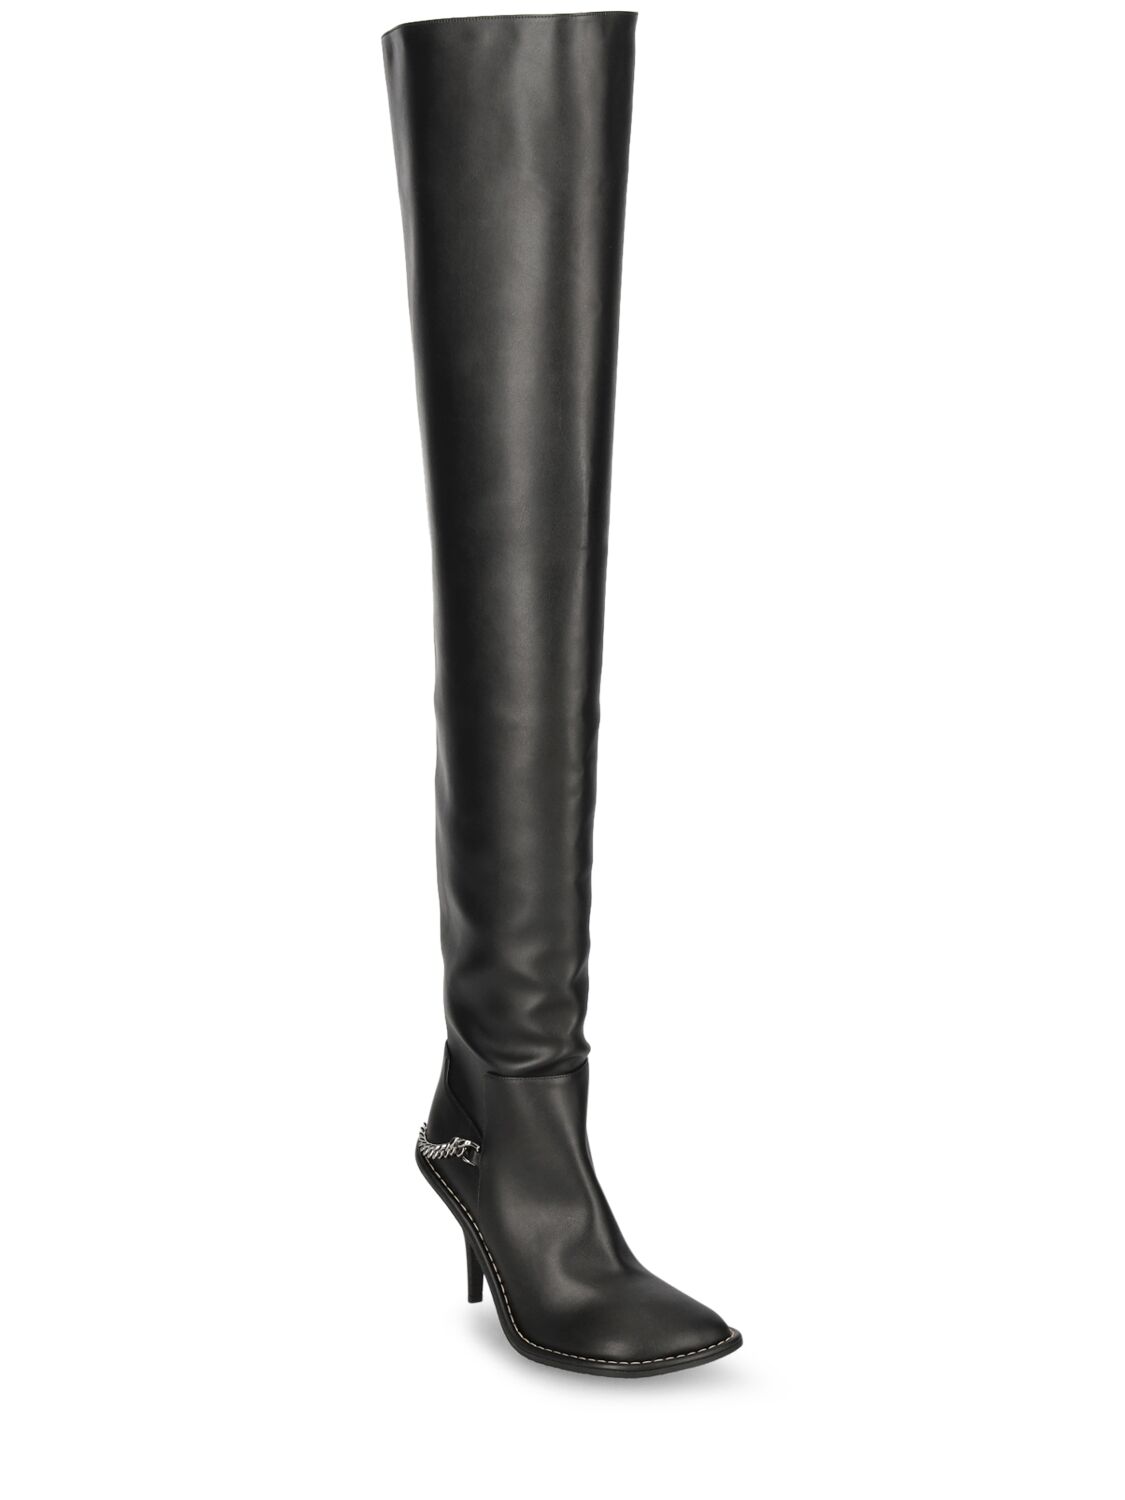 Stella McCartney 95mm Faux Leather Over-the-knee Boots